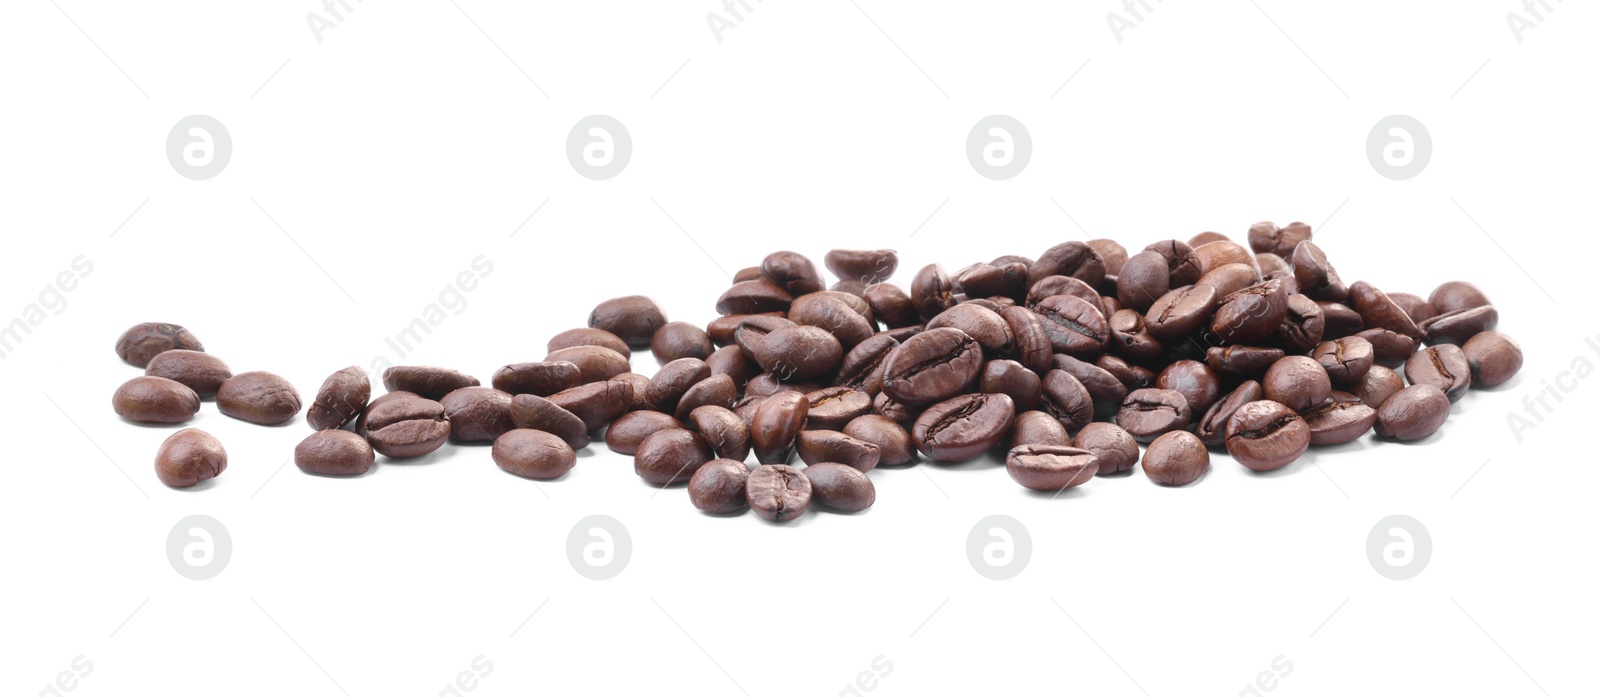 Photo of Pile of roasted coffee beans isolated on white